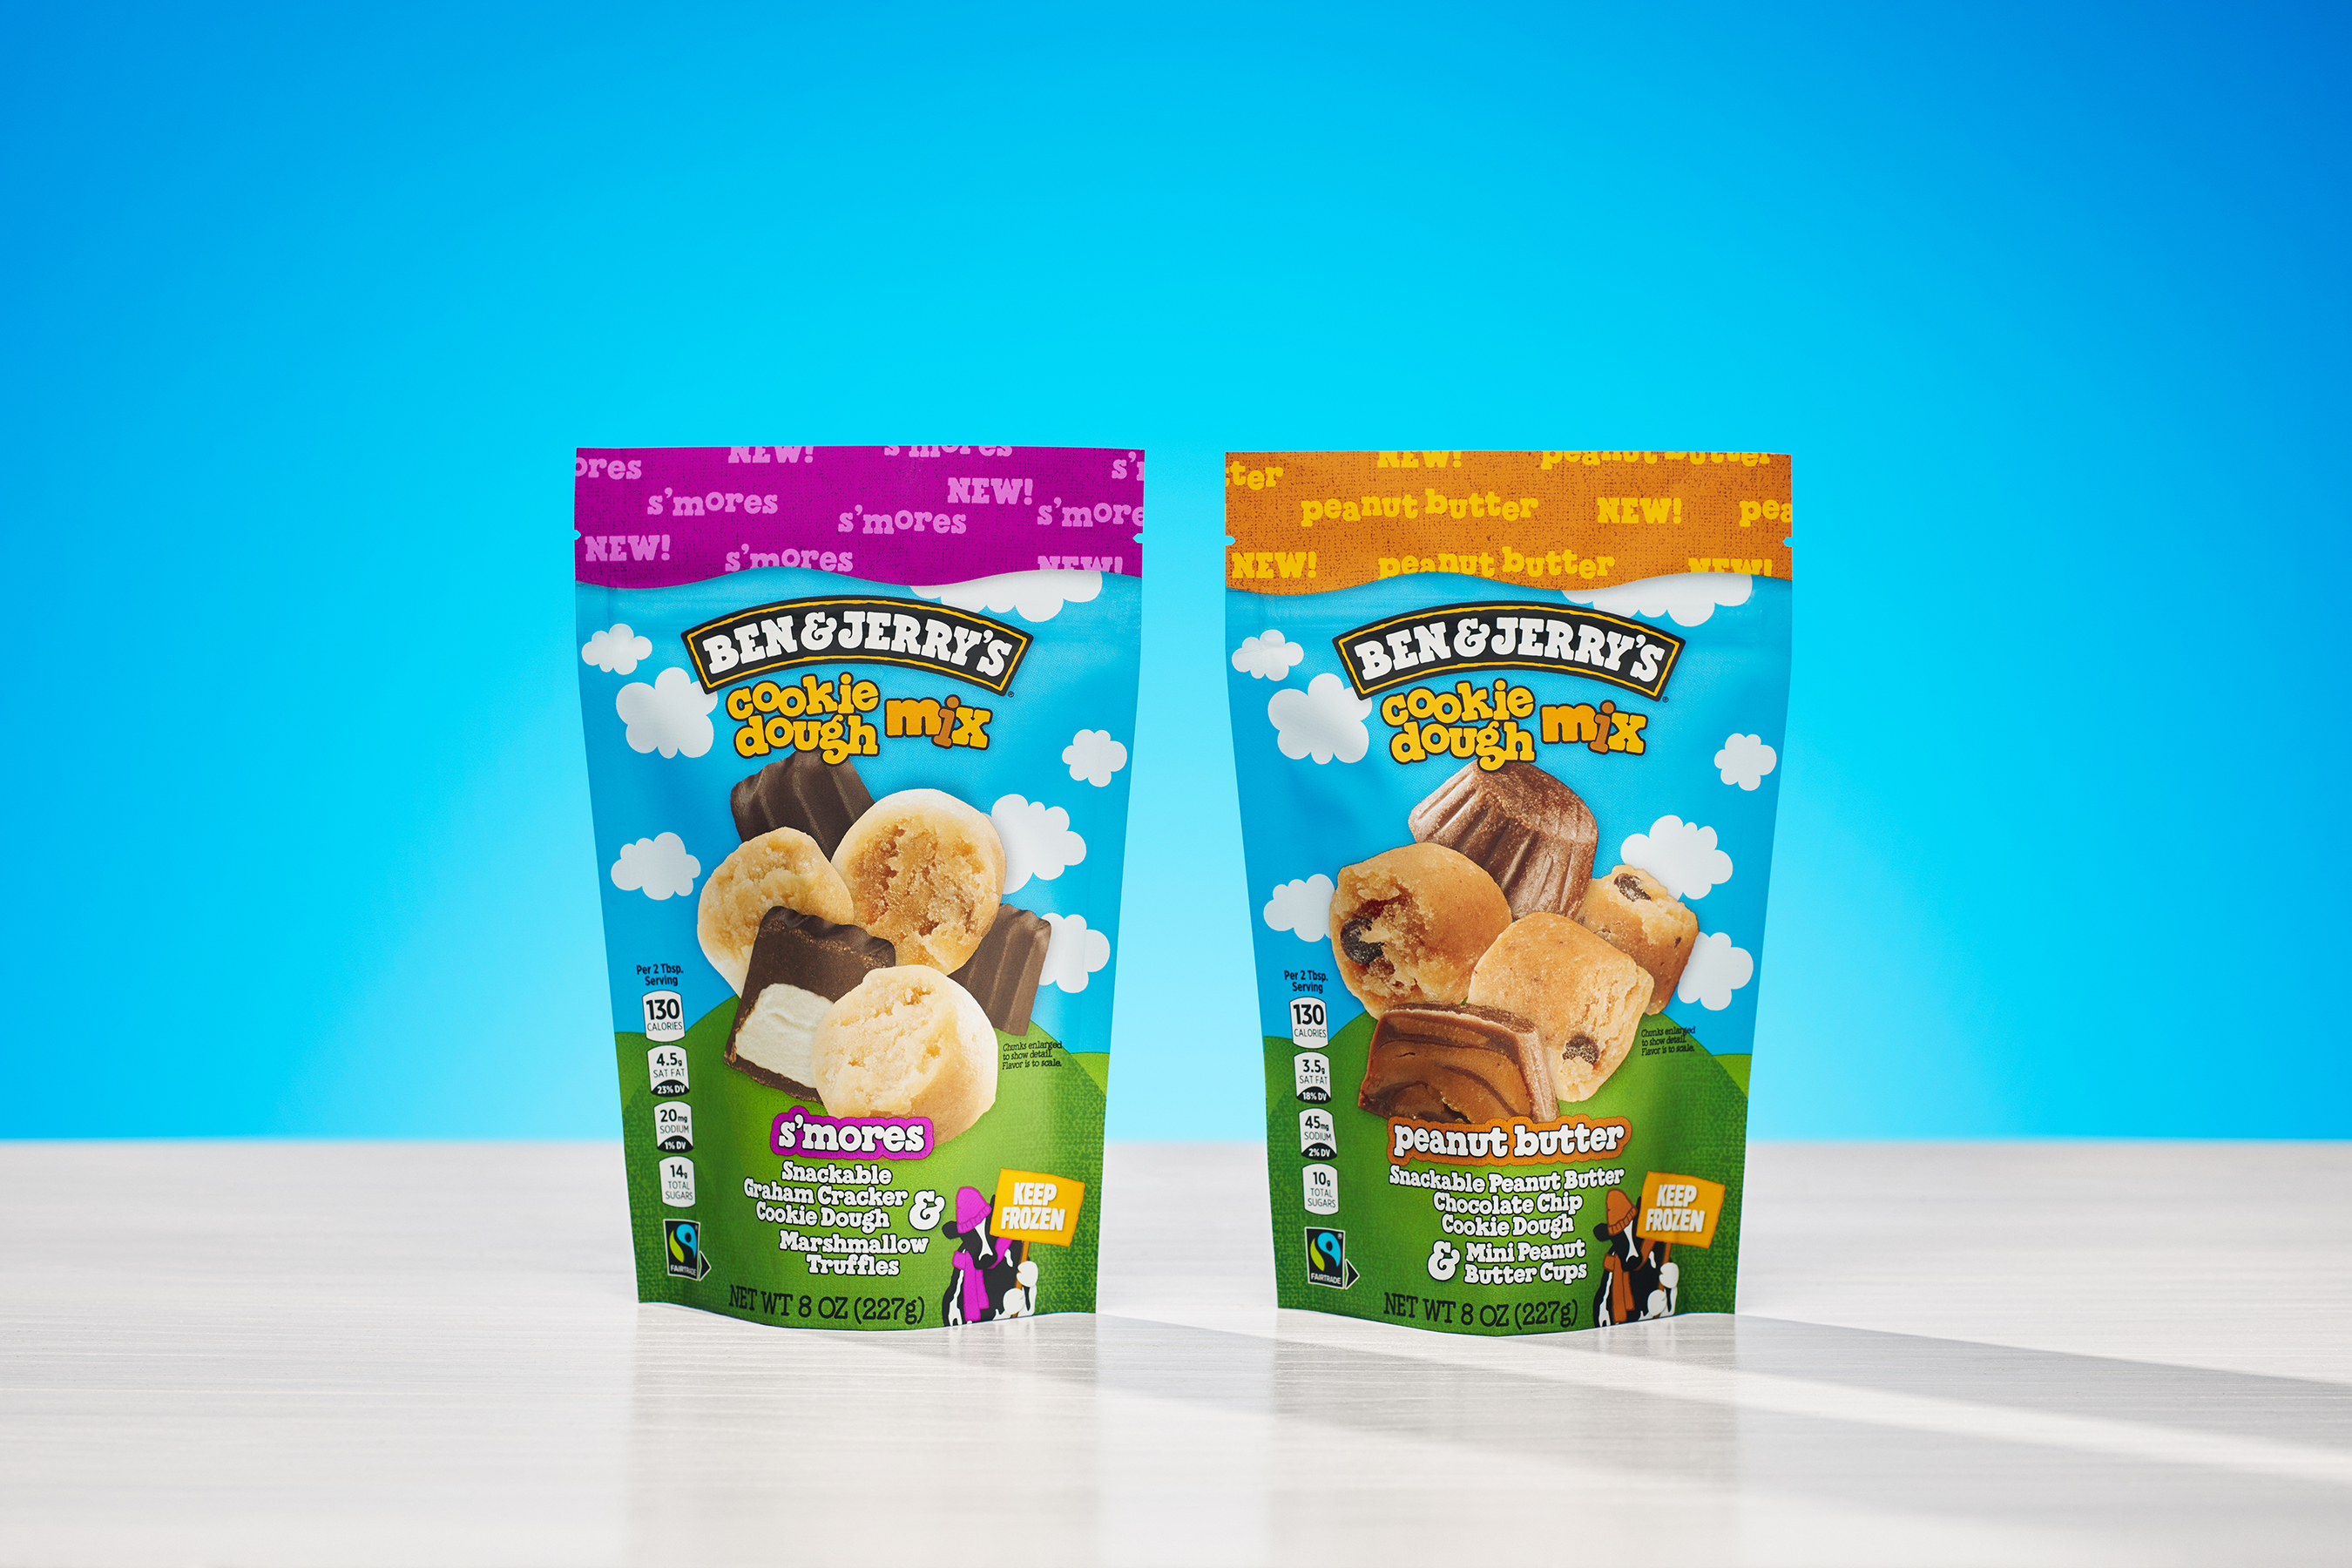 Ben & Jerry’s newest Cookie Dough Mix flavors are unveiled featuring cookie dough mixed with candy! S’mores or Peanut Butter?